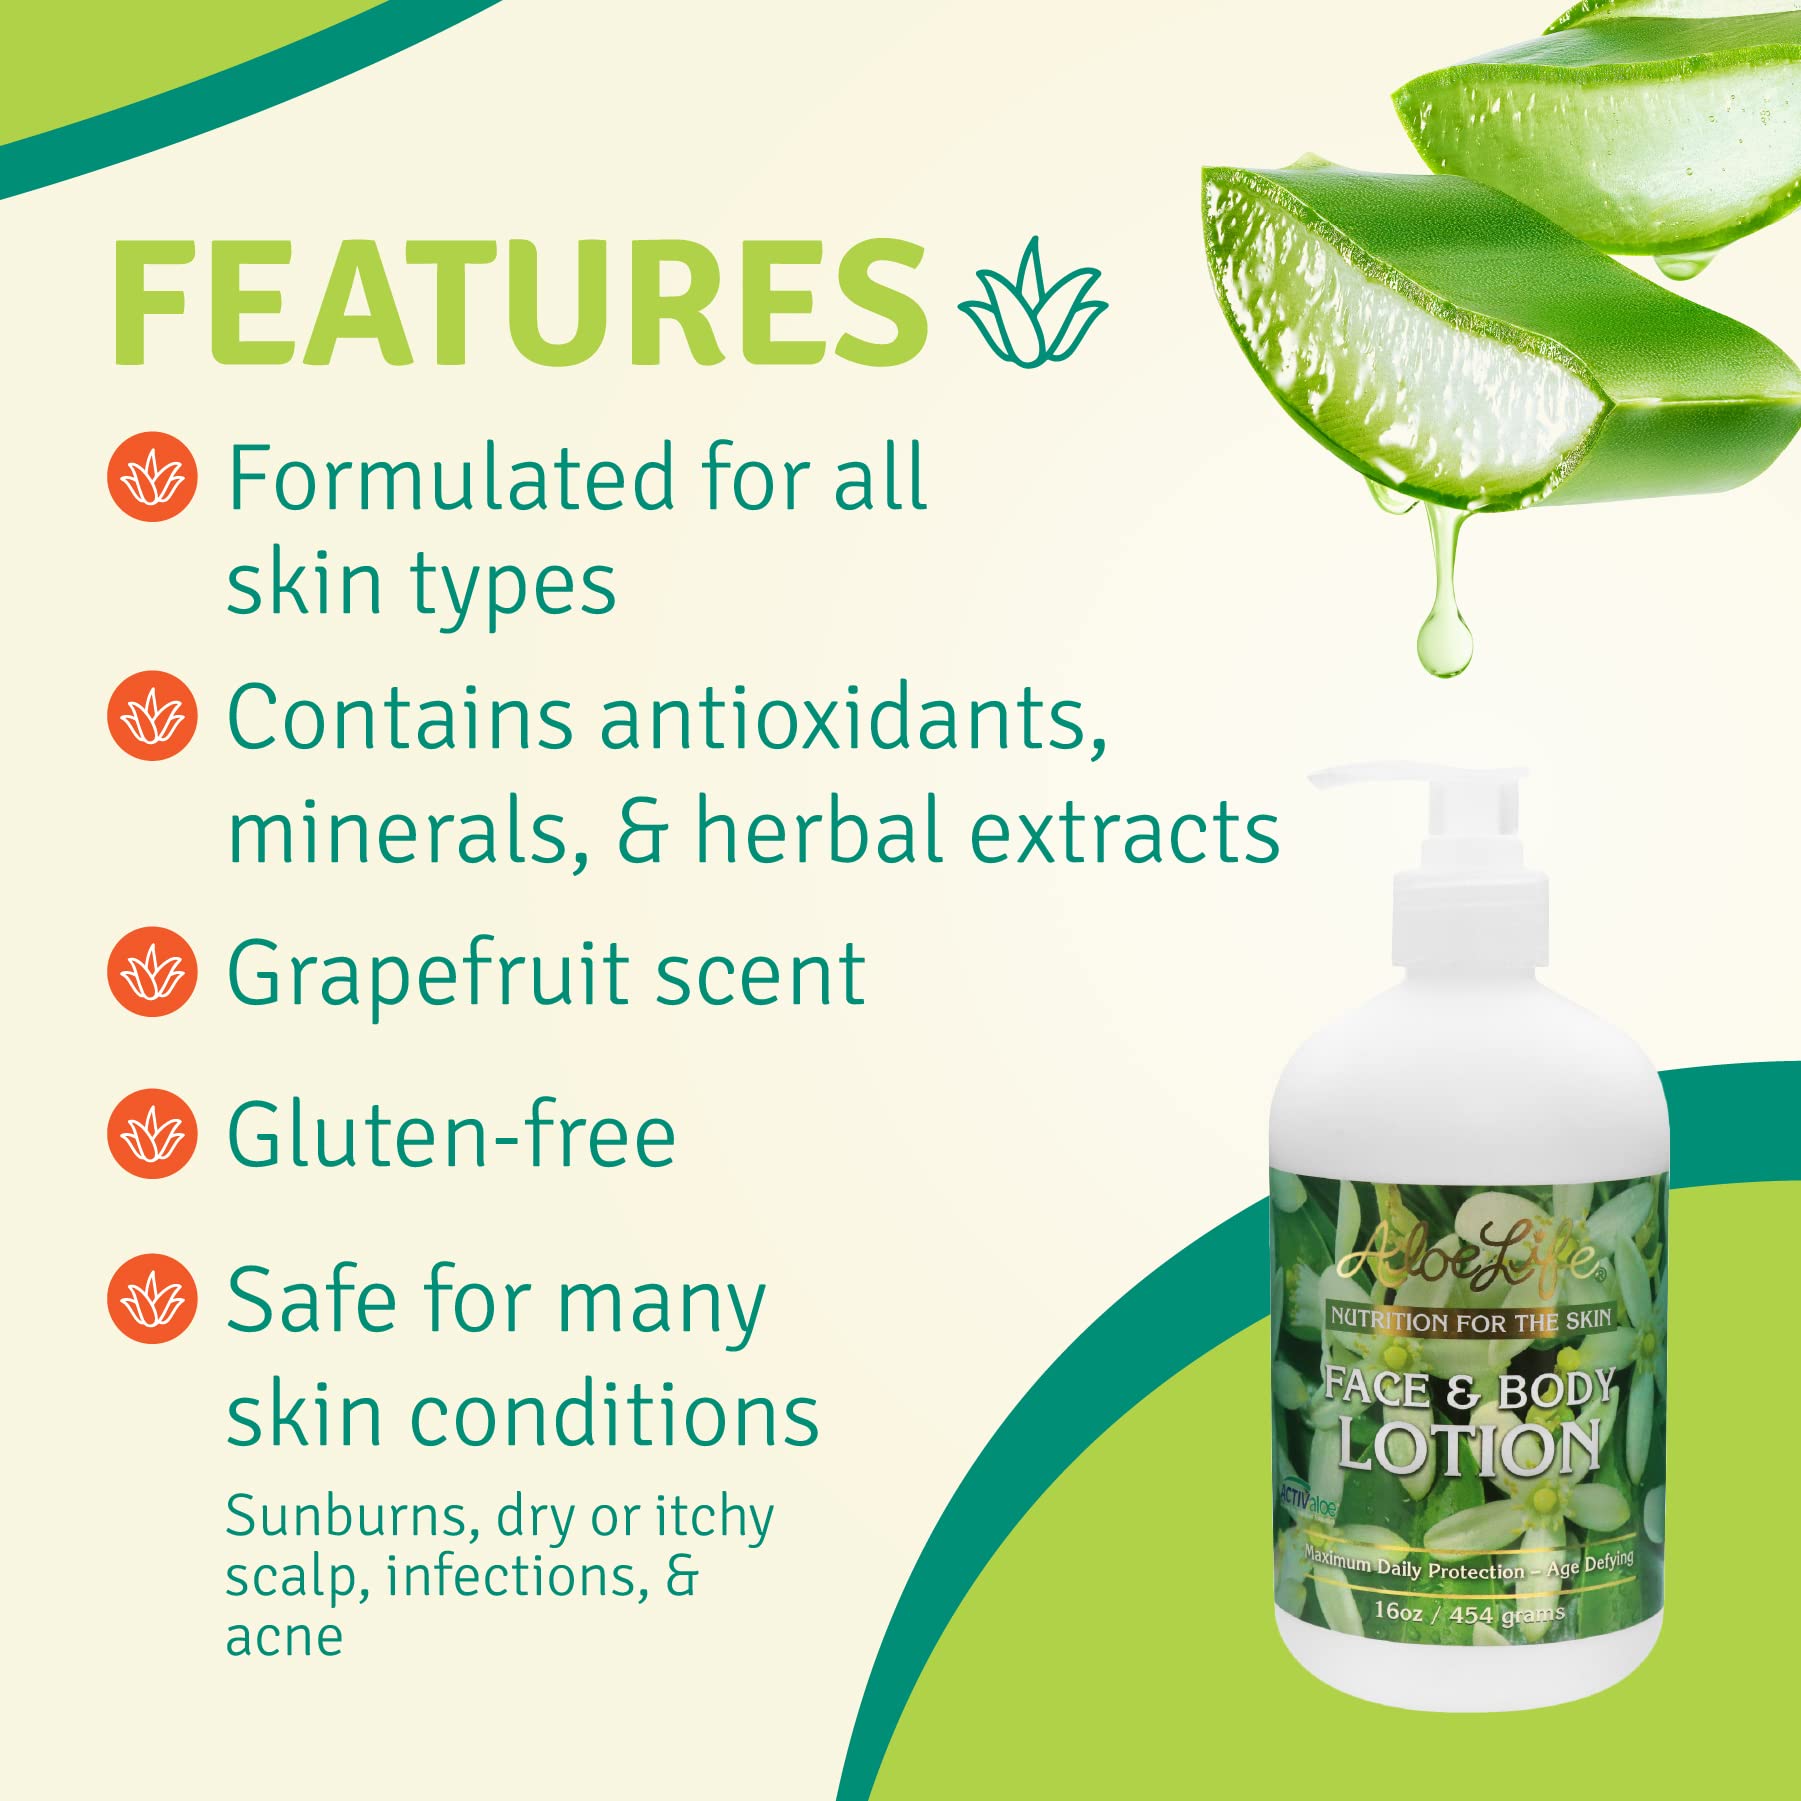 Aloe Life - Face & Body Lotion, Concentrated Formula, Hydrates Dry Skin, Contains Antioxidants, Minerals, & Herbal Extracts, Pleasant Grapefruit Scent, Safe For All Skin Types, Gluten-Free (16 oz)